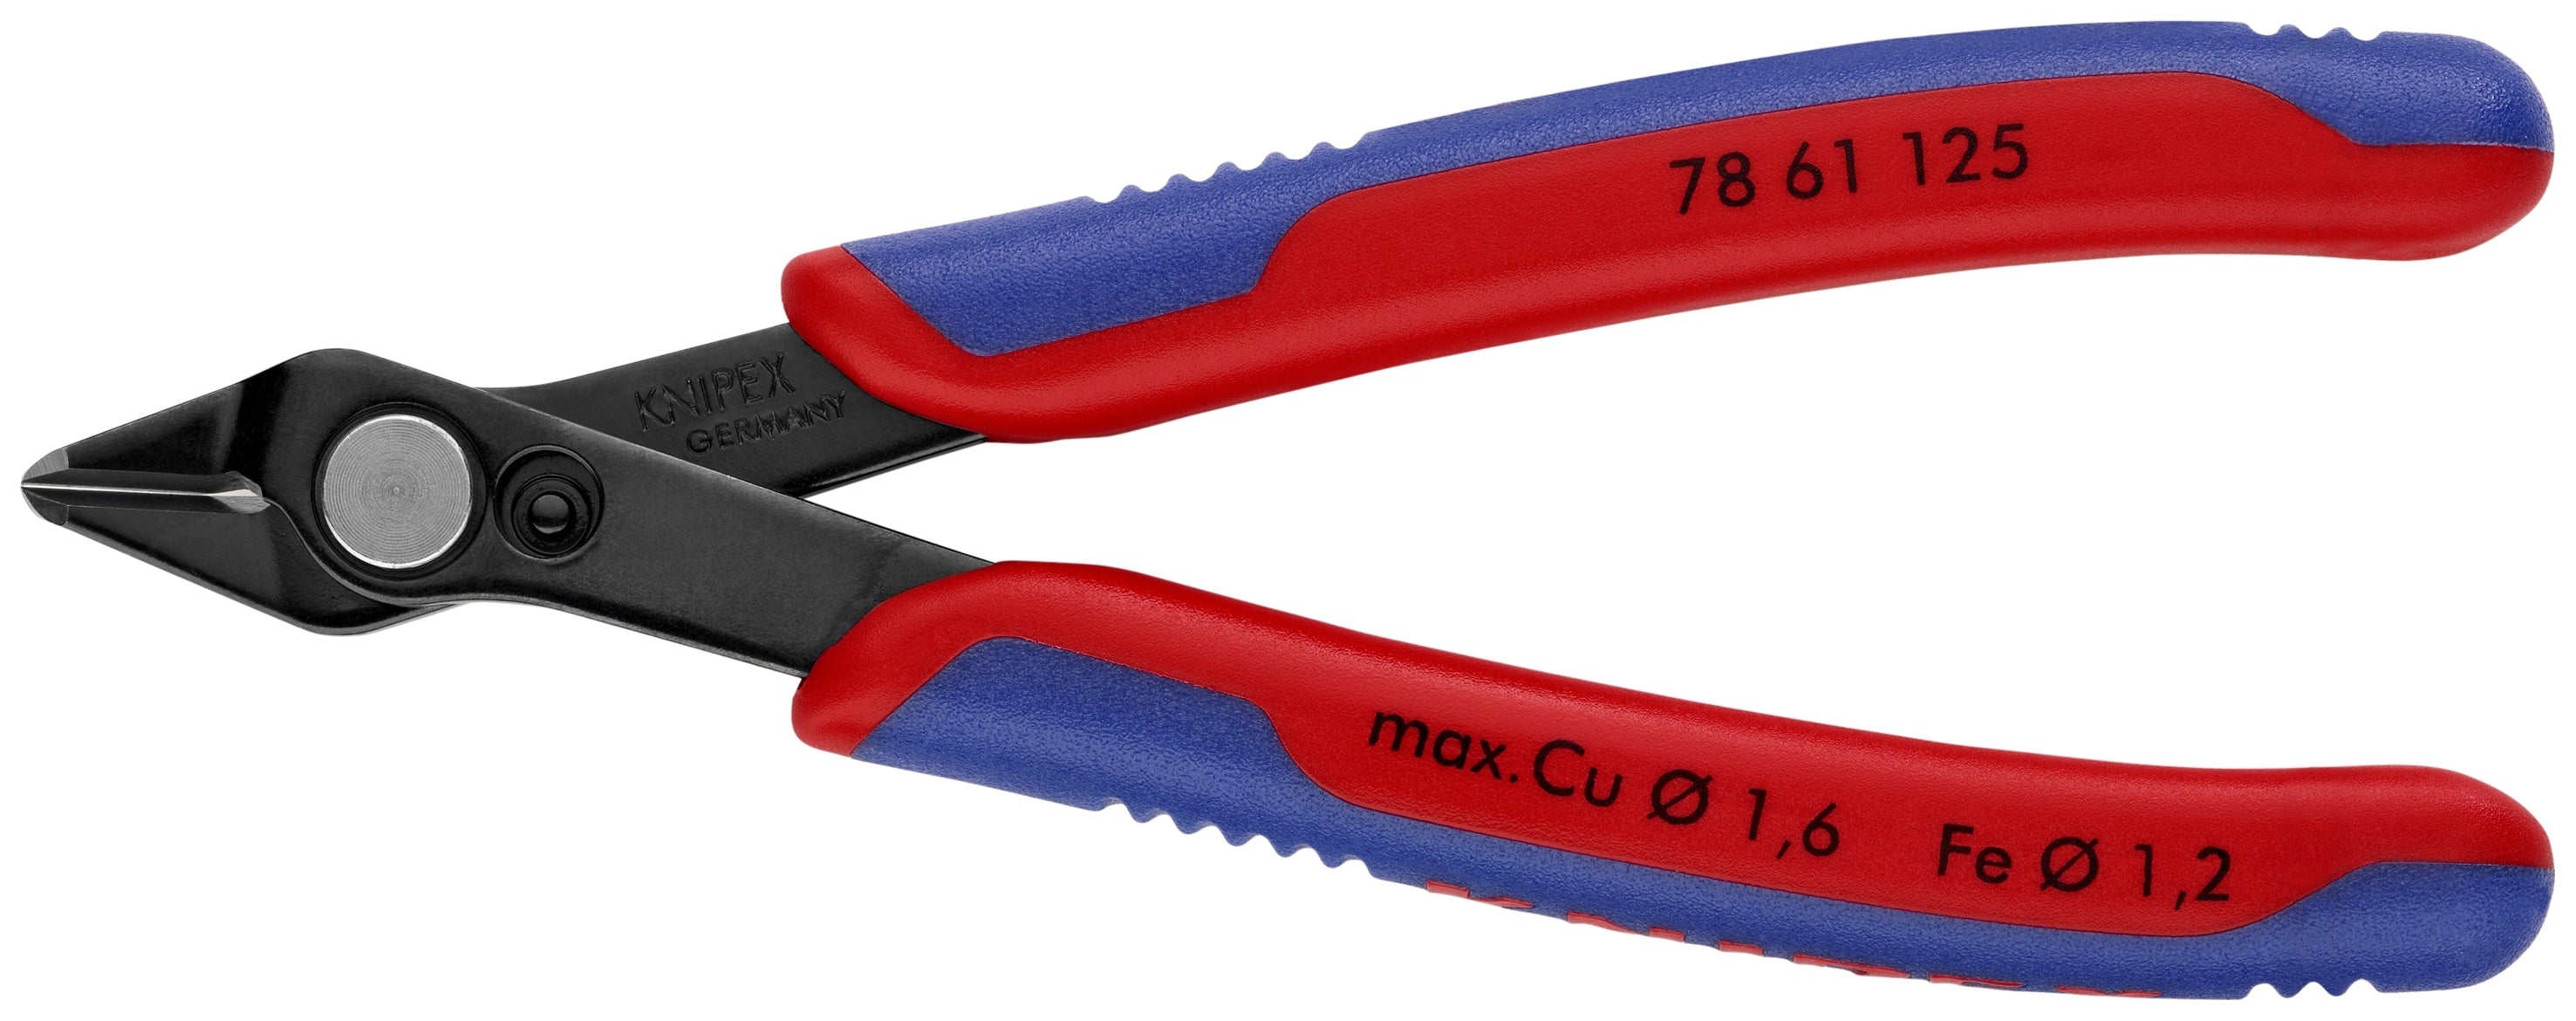 Knipex Electronic Knips® 5" 78 61 125